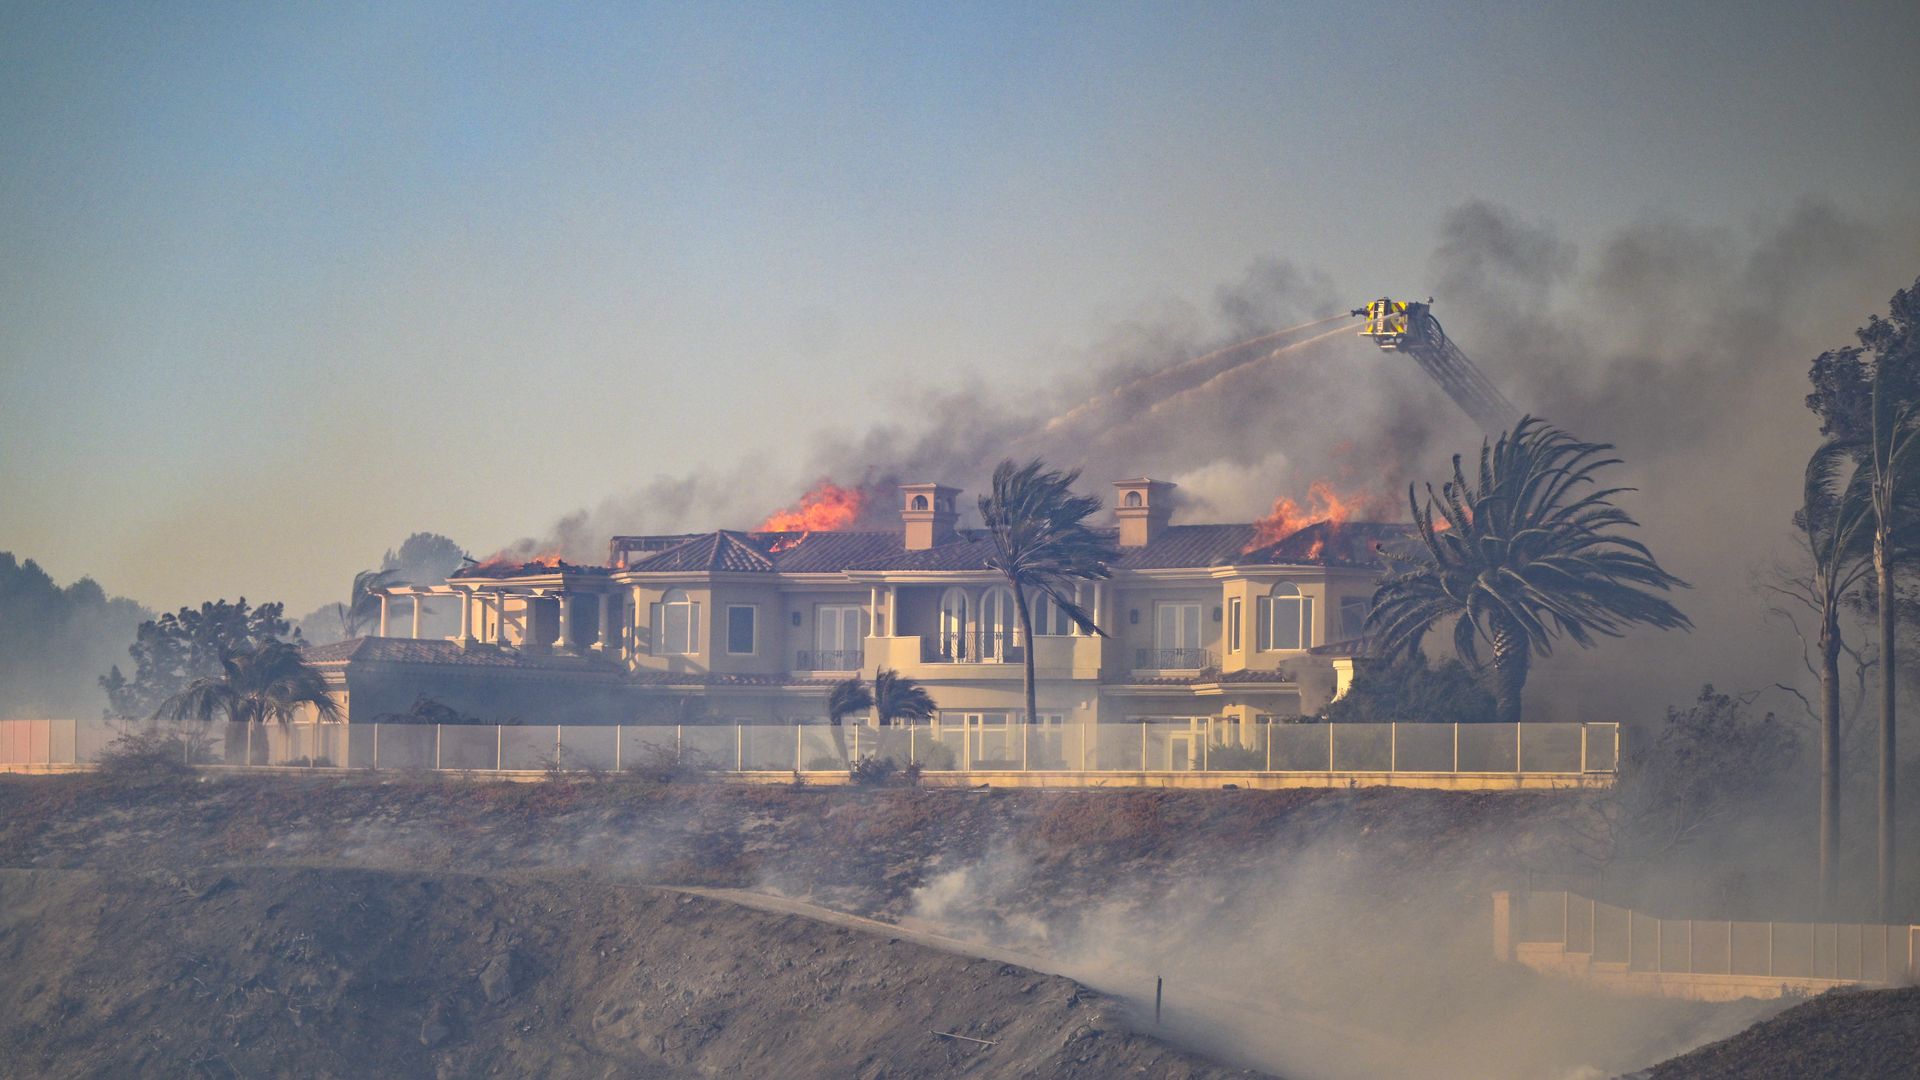  Firefighters battle the Coastal Fire in Laguna Niguel, CA, on Wednesday, May 11.